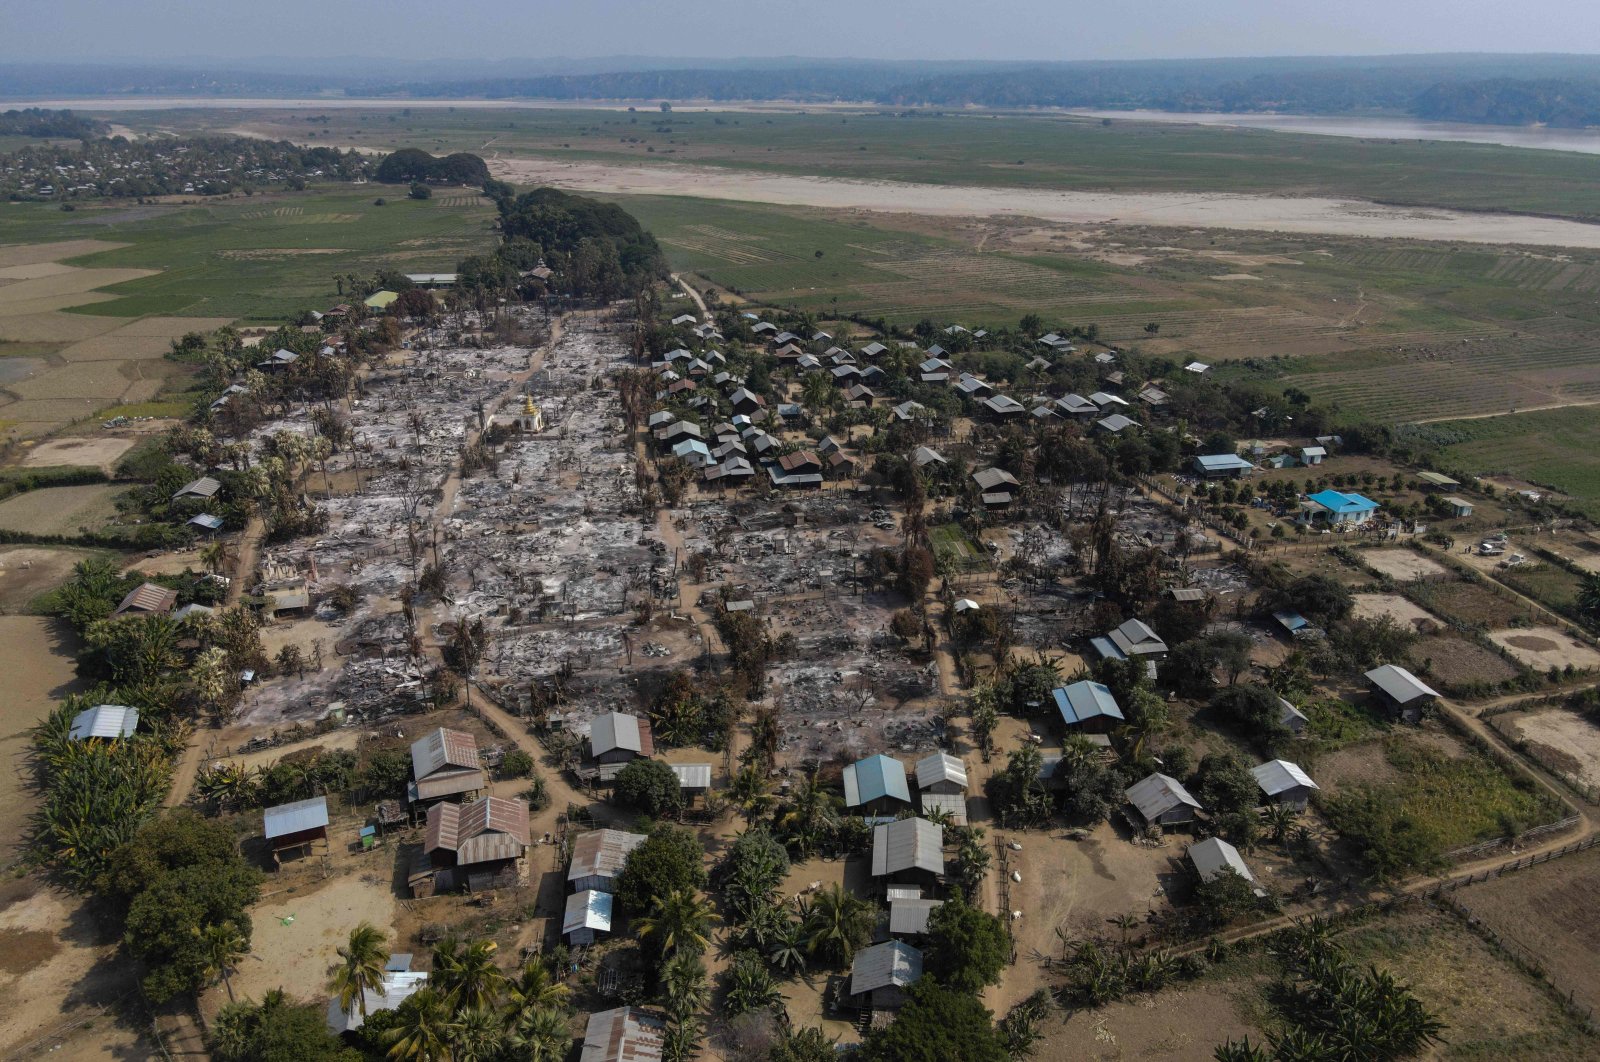 This handout photo by Chin Twin Chit Thu taken on Feb. 3, 2022 and released on Feb. 5, 2022 shows an aerial photo of burnt buildings from fires in Mingin Township, in Sagaing Division, where more than 105 buildings were destroyed by junta military troops, according to local media. (AFP File Photo)